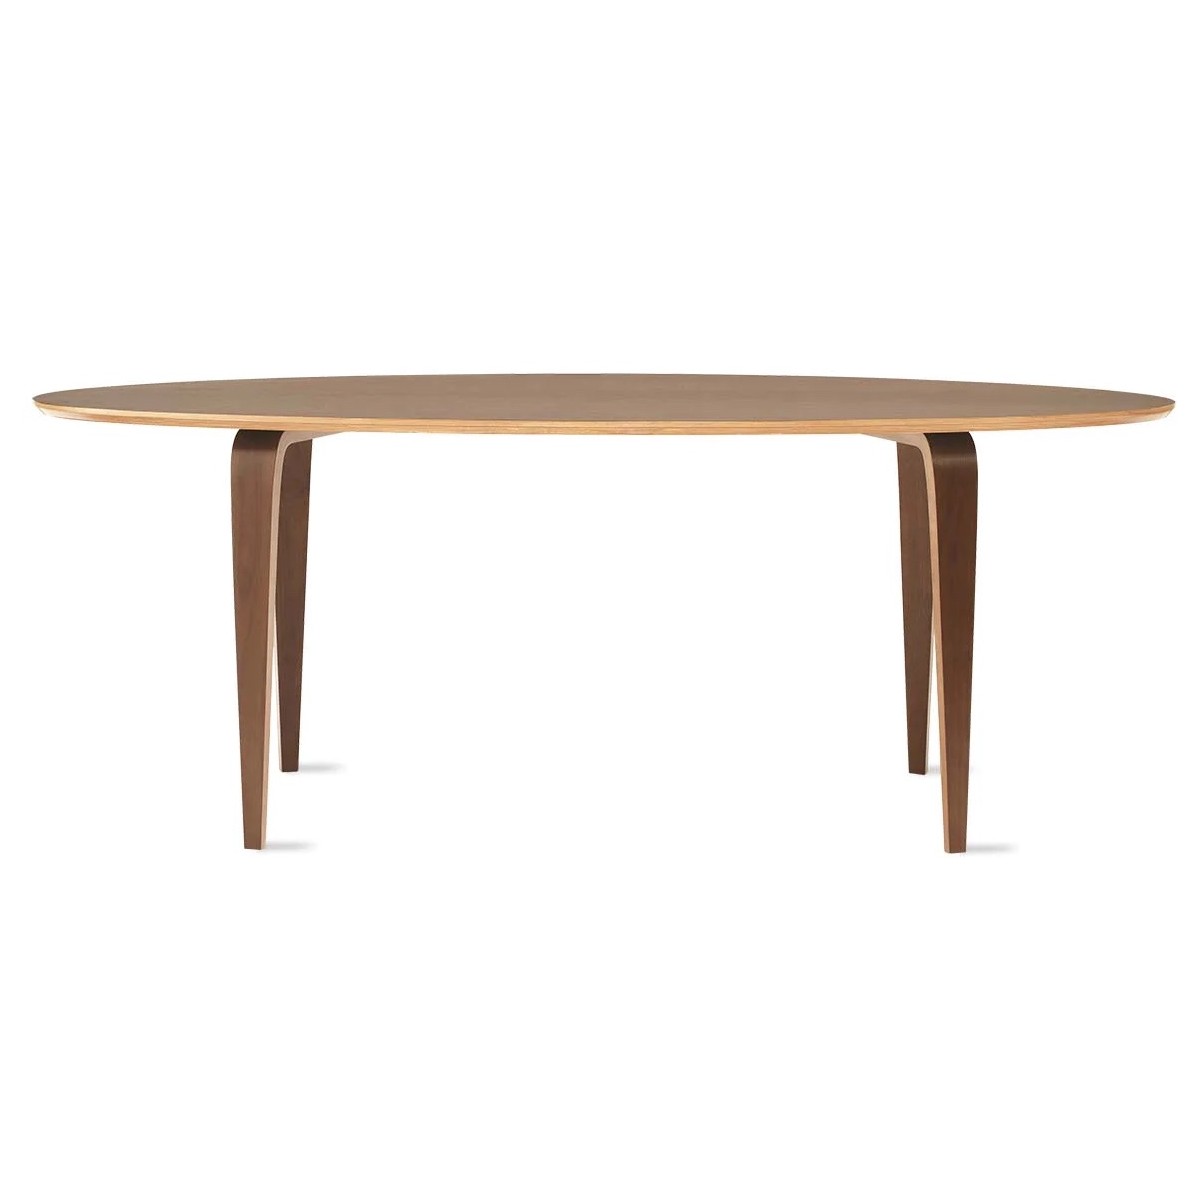 213,3 x 96,5 cm – Oval table – Natural walnut